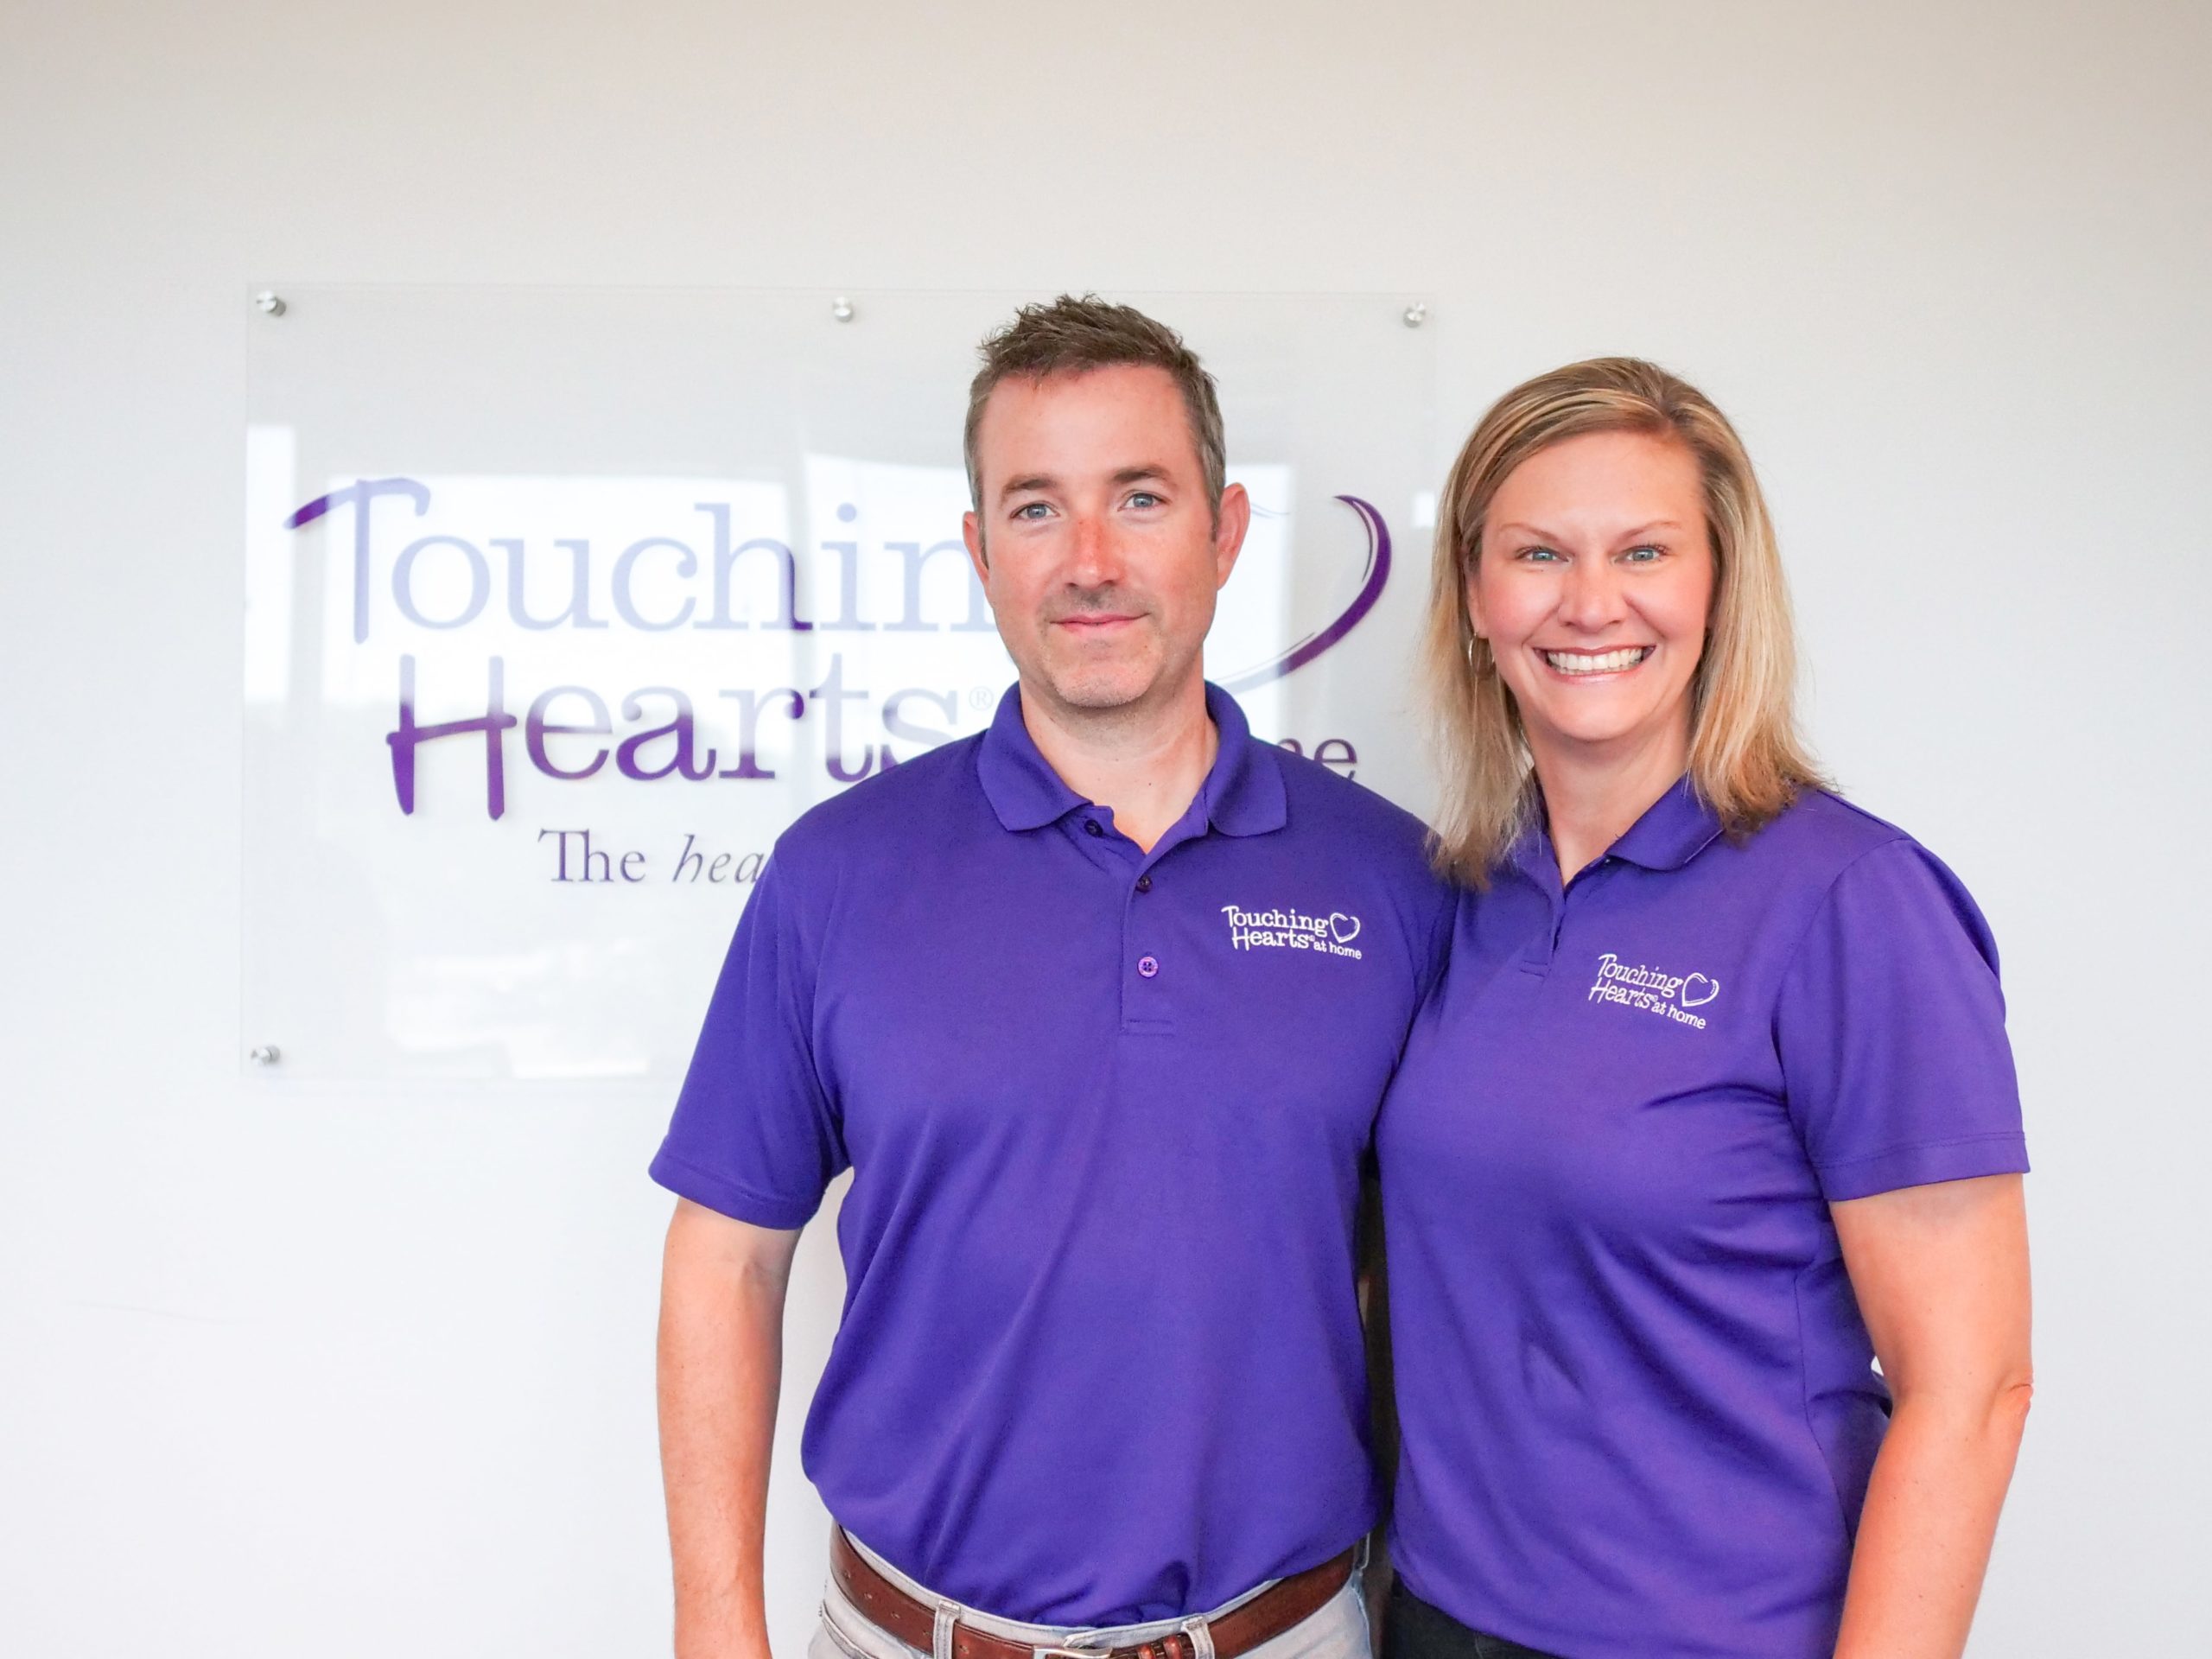 Touching Hearts at Home franchise owners